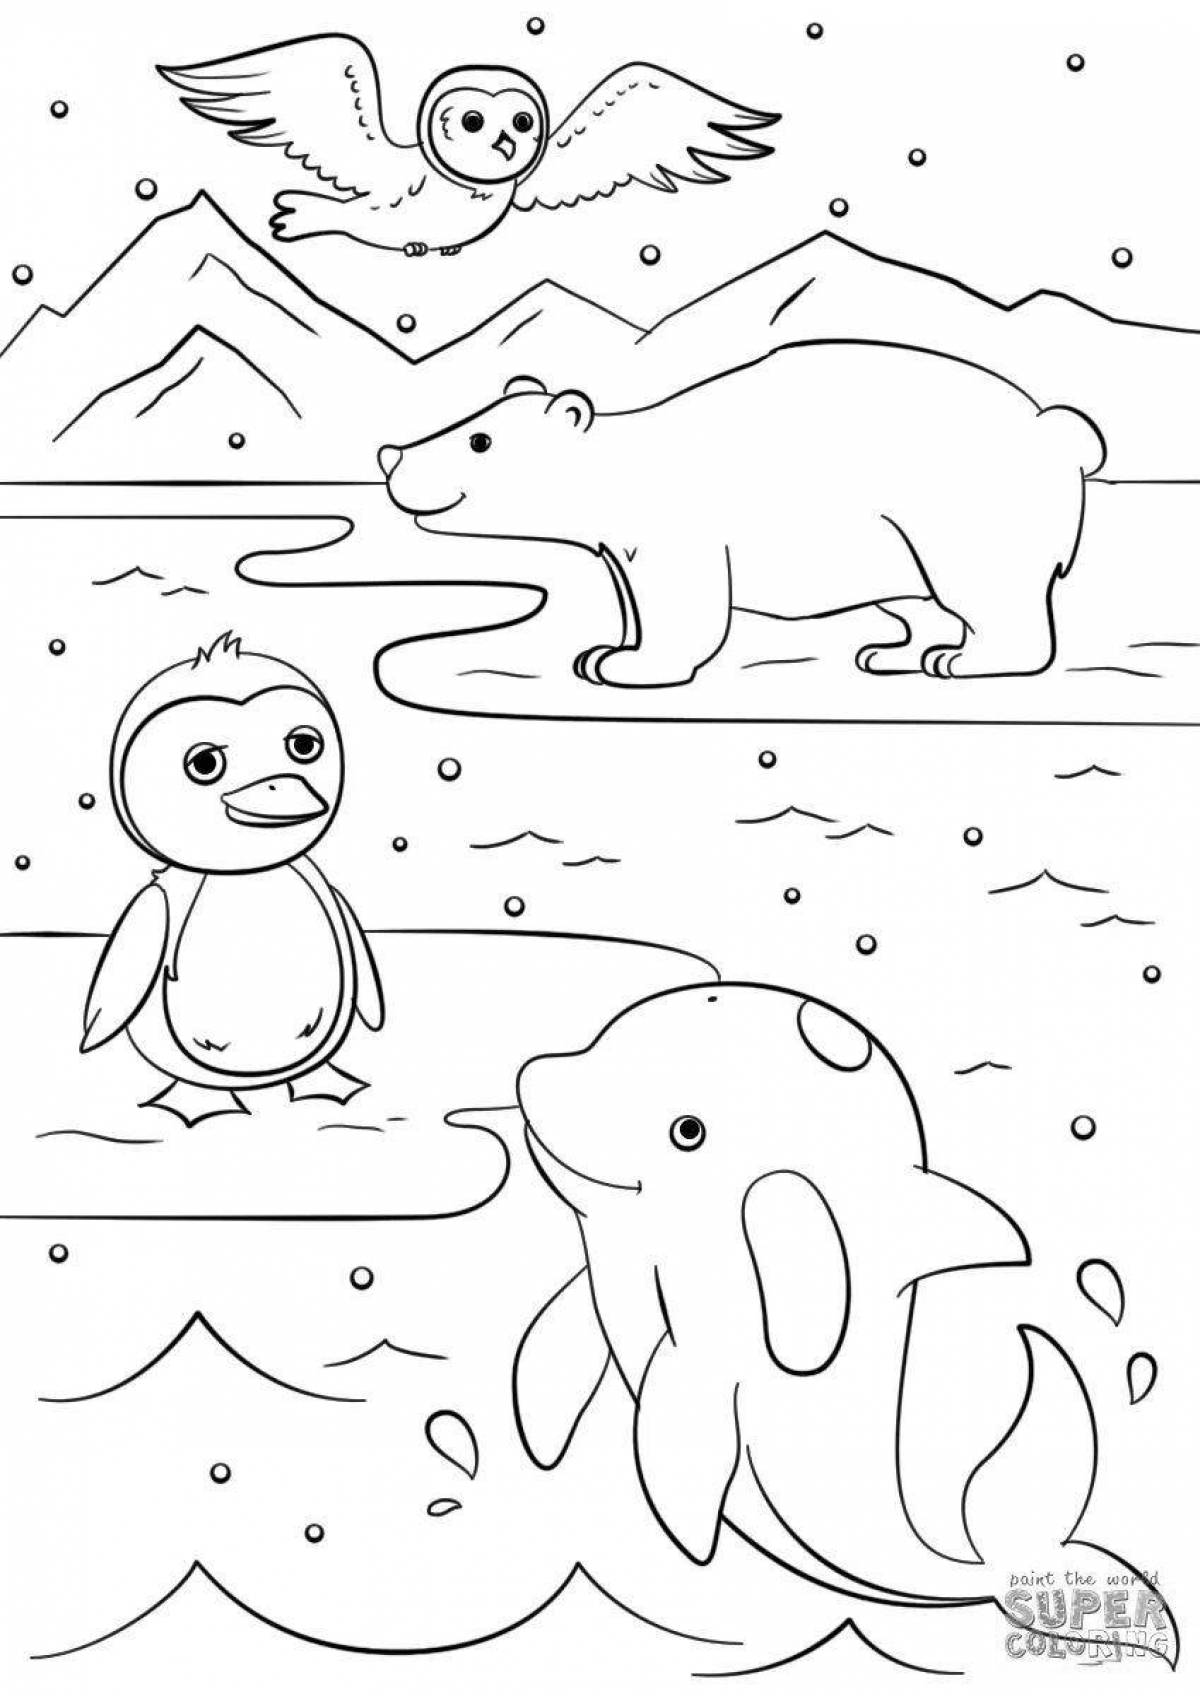 Animals of cold countries for kids #2